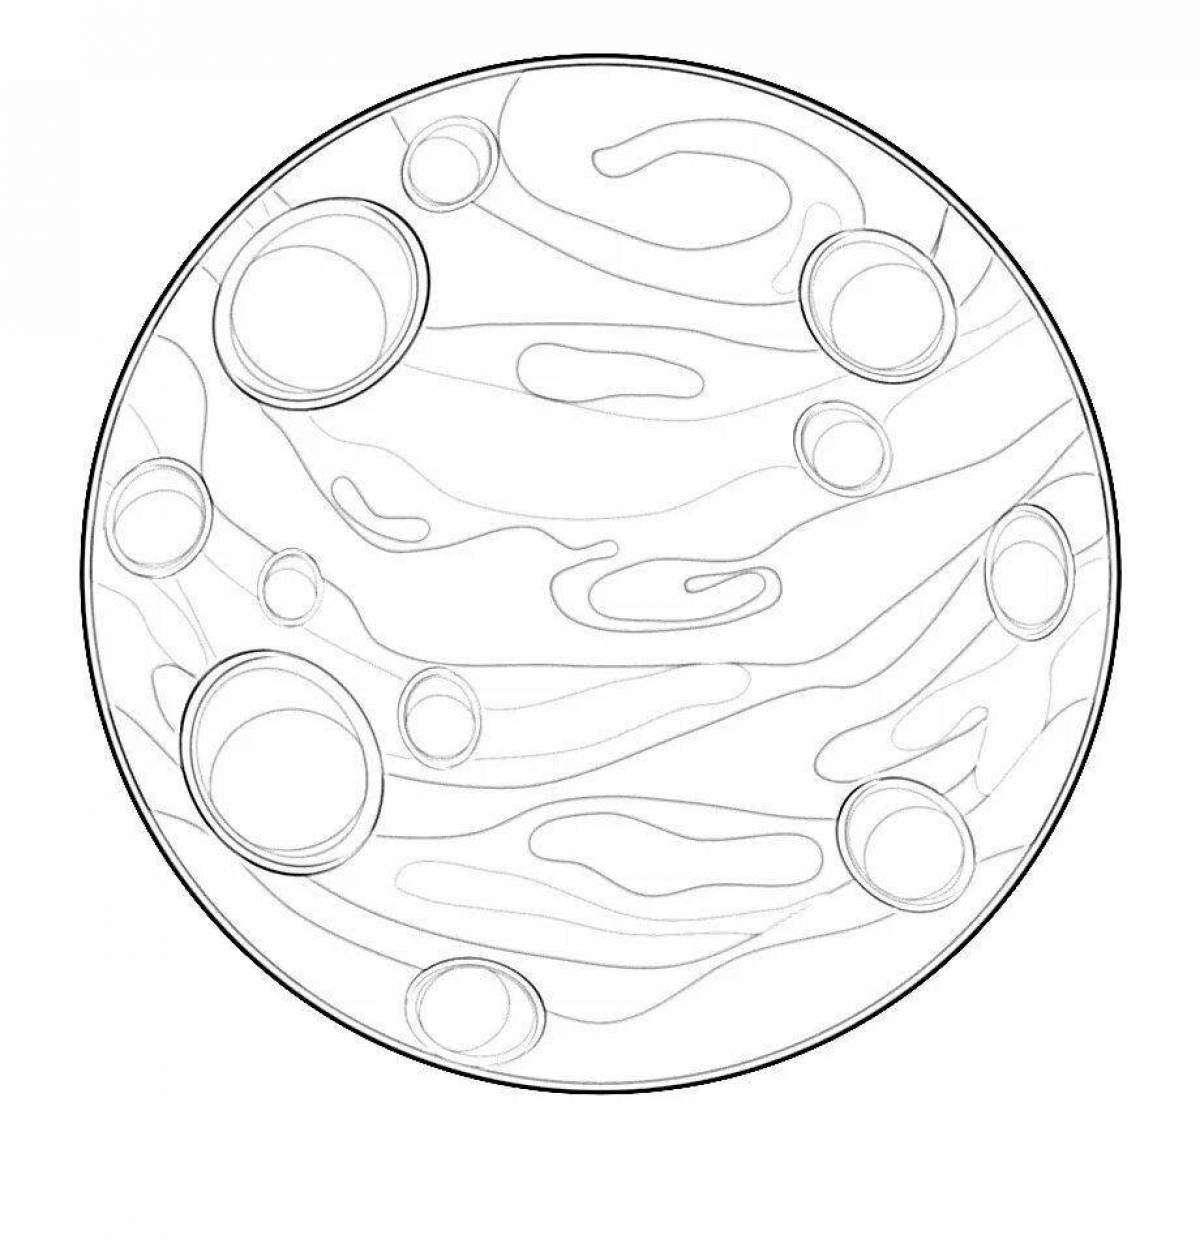 Coloring page adorable planet mars